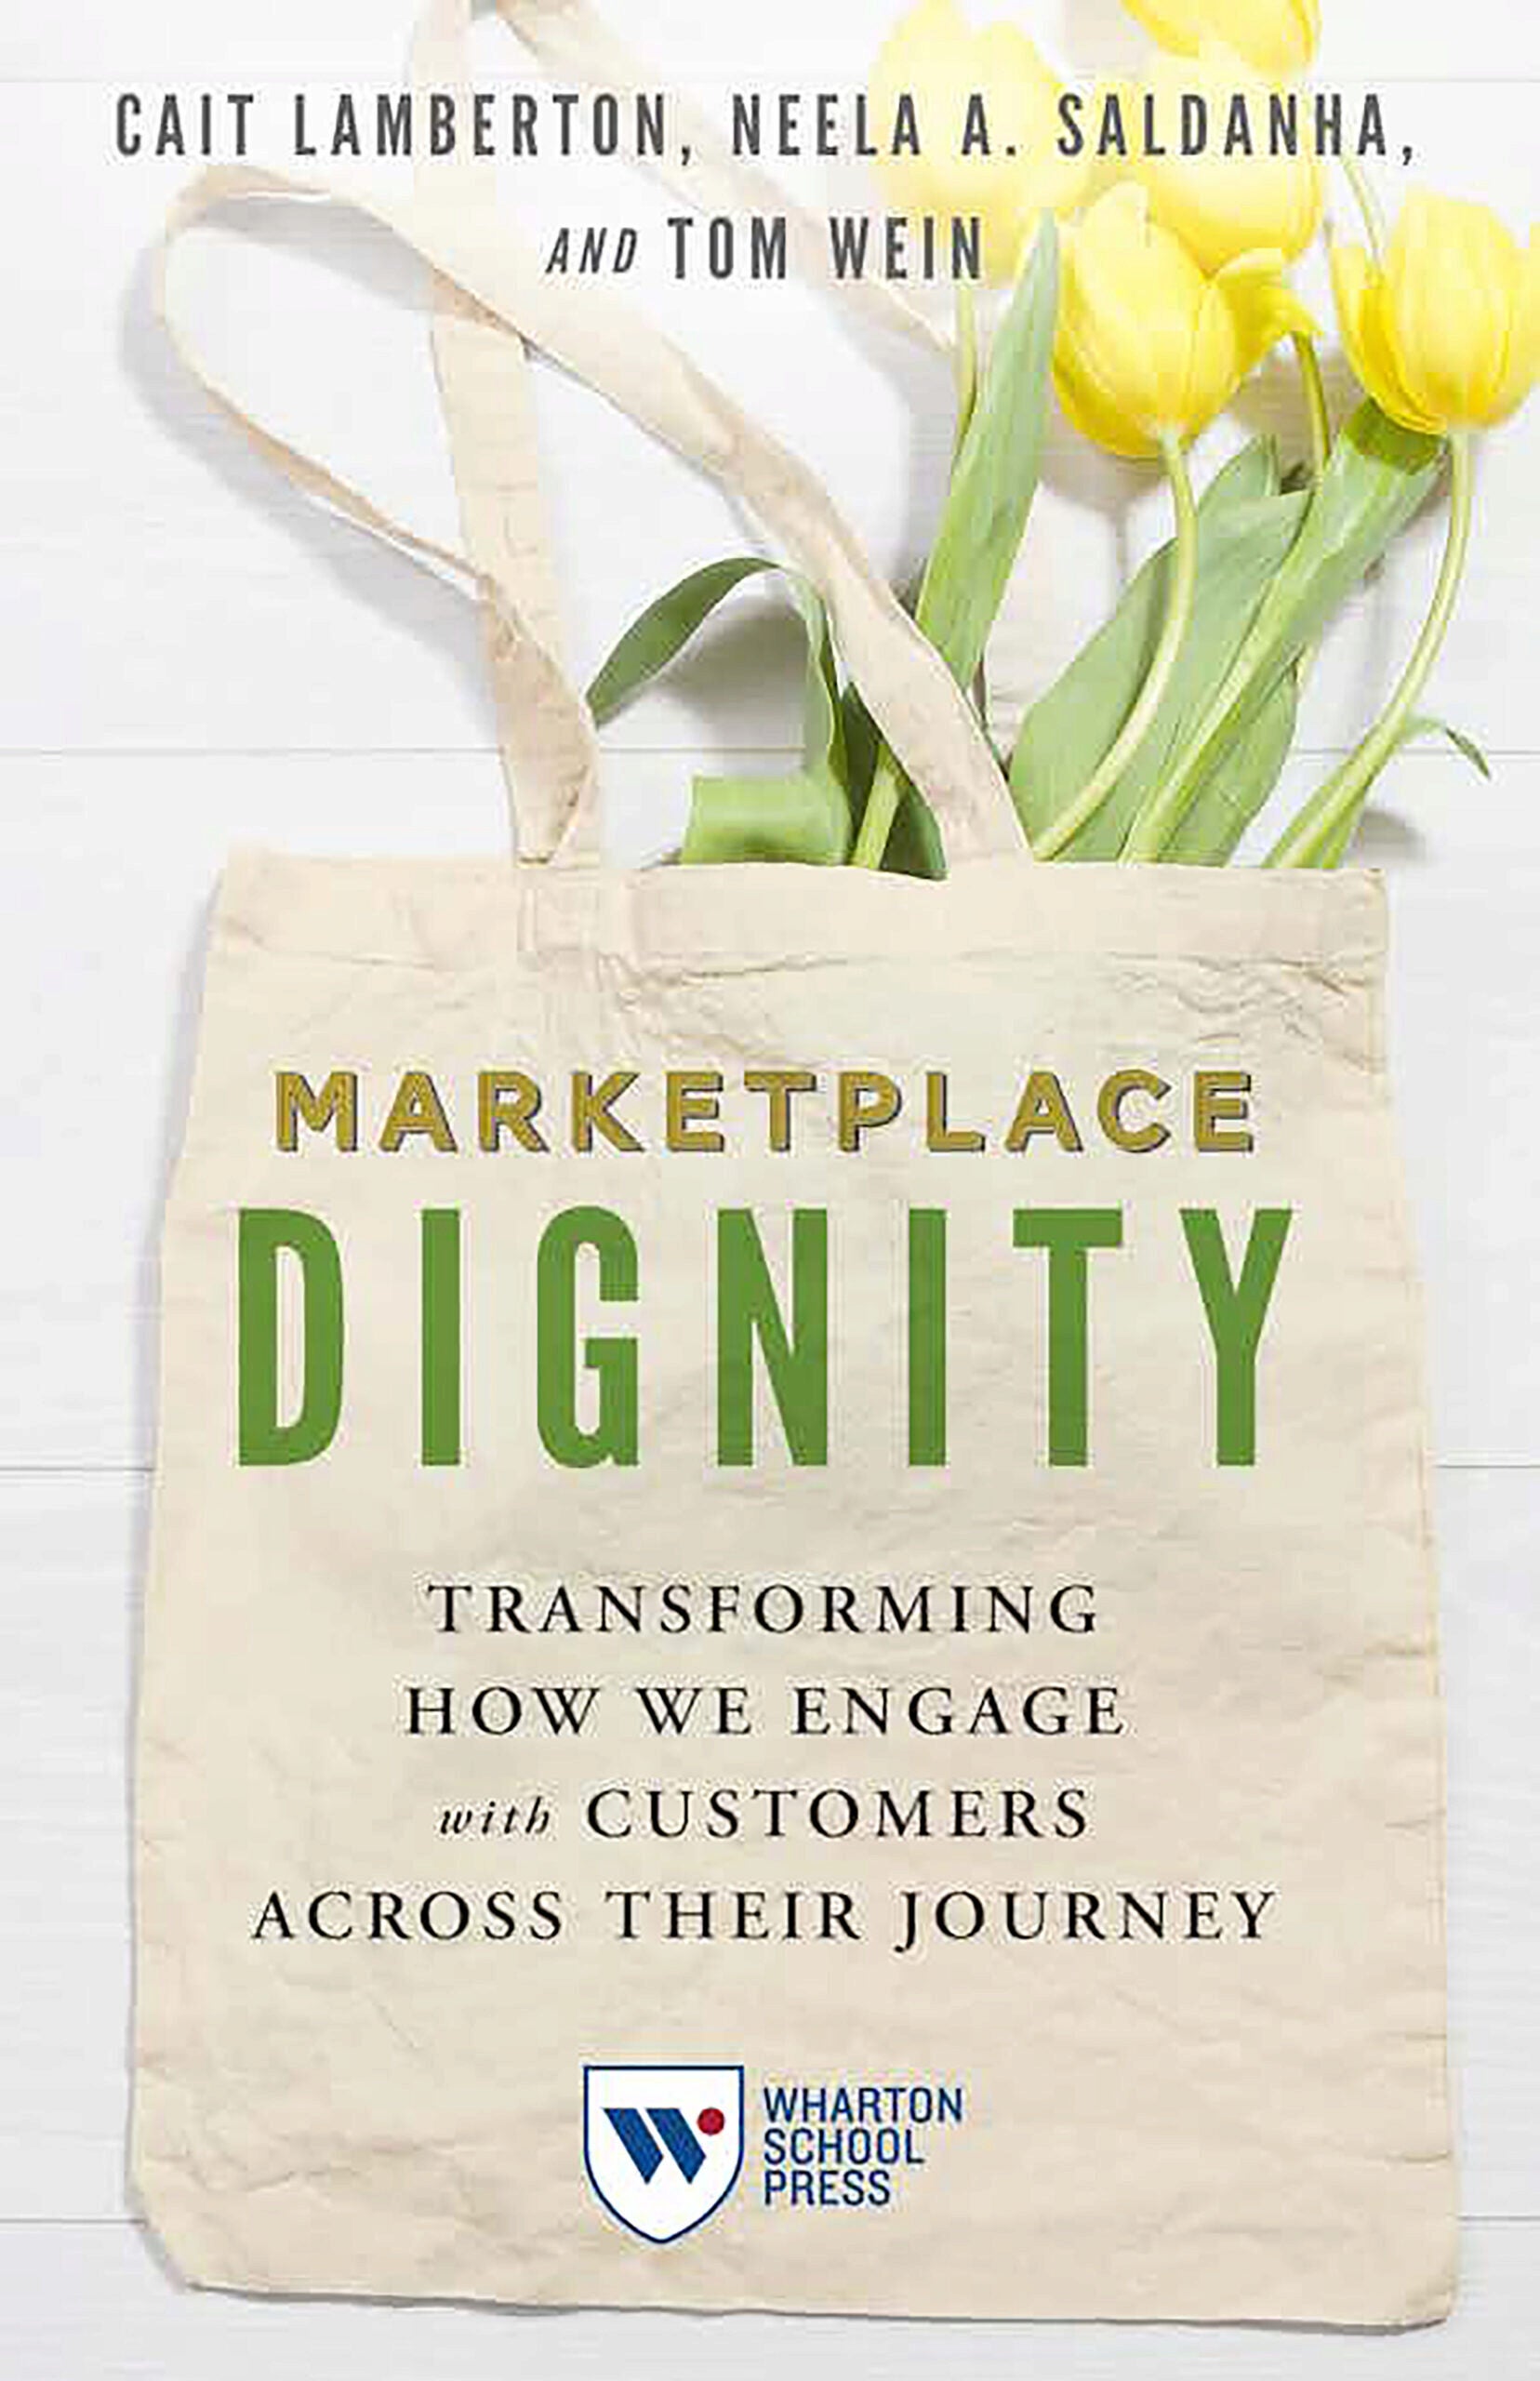 Book cover of "Marketplace Dignity" depicting flowers in a tote bag